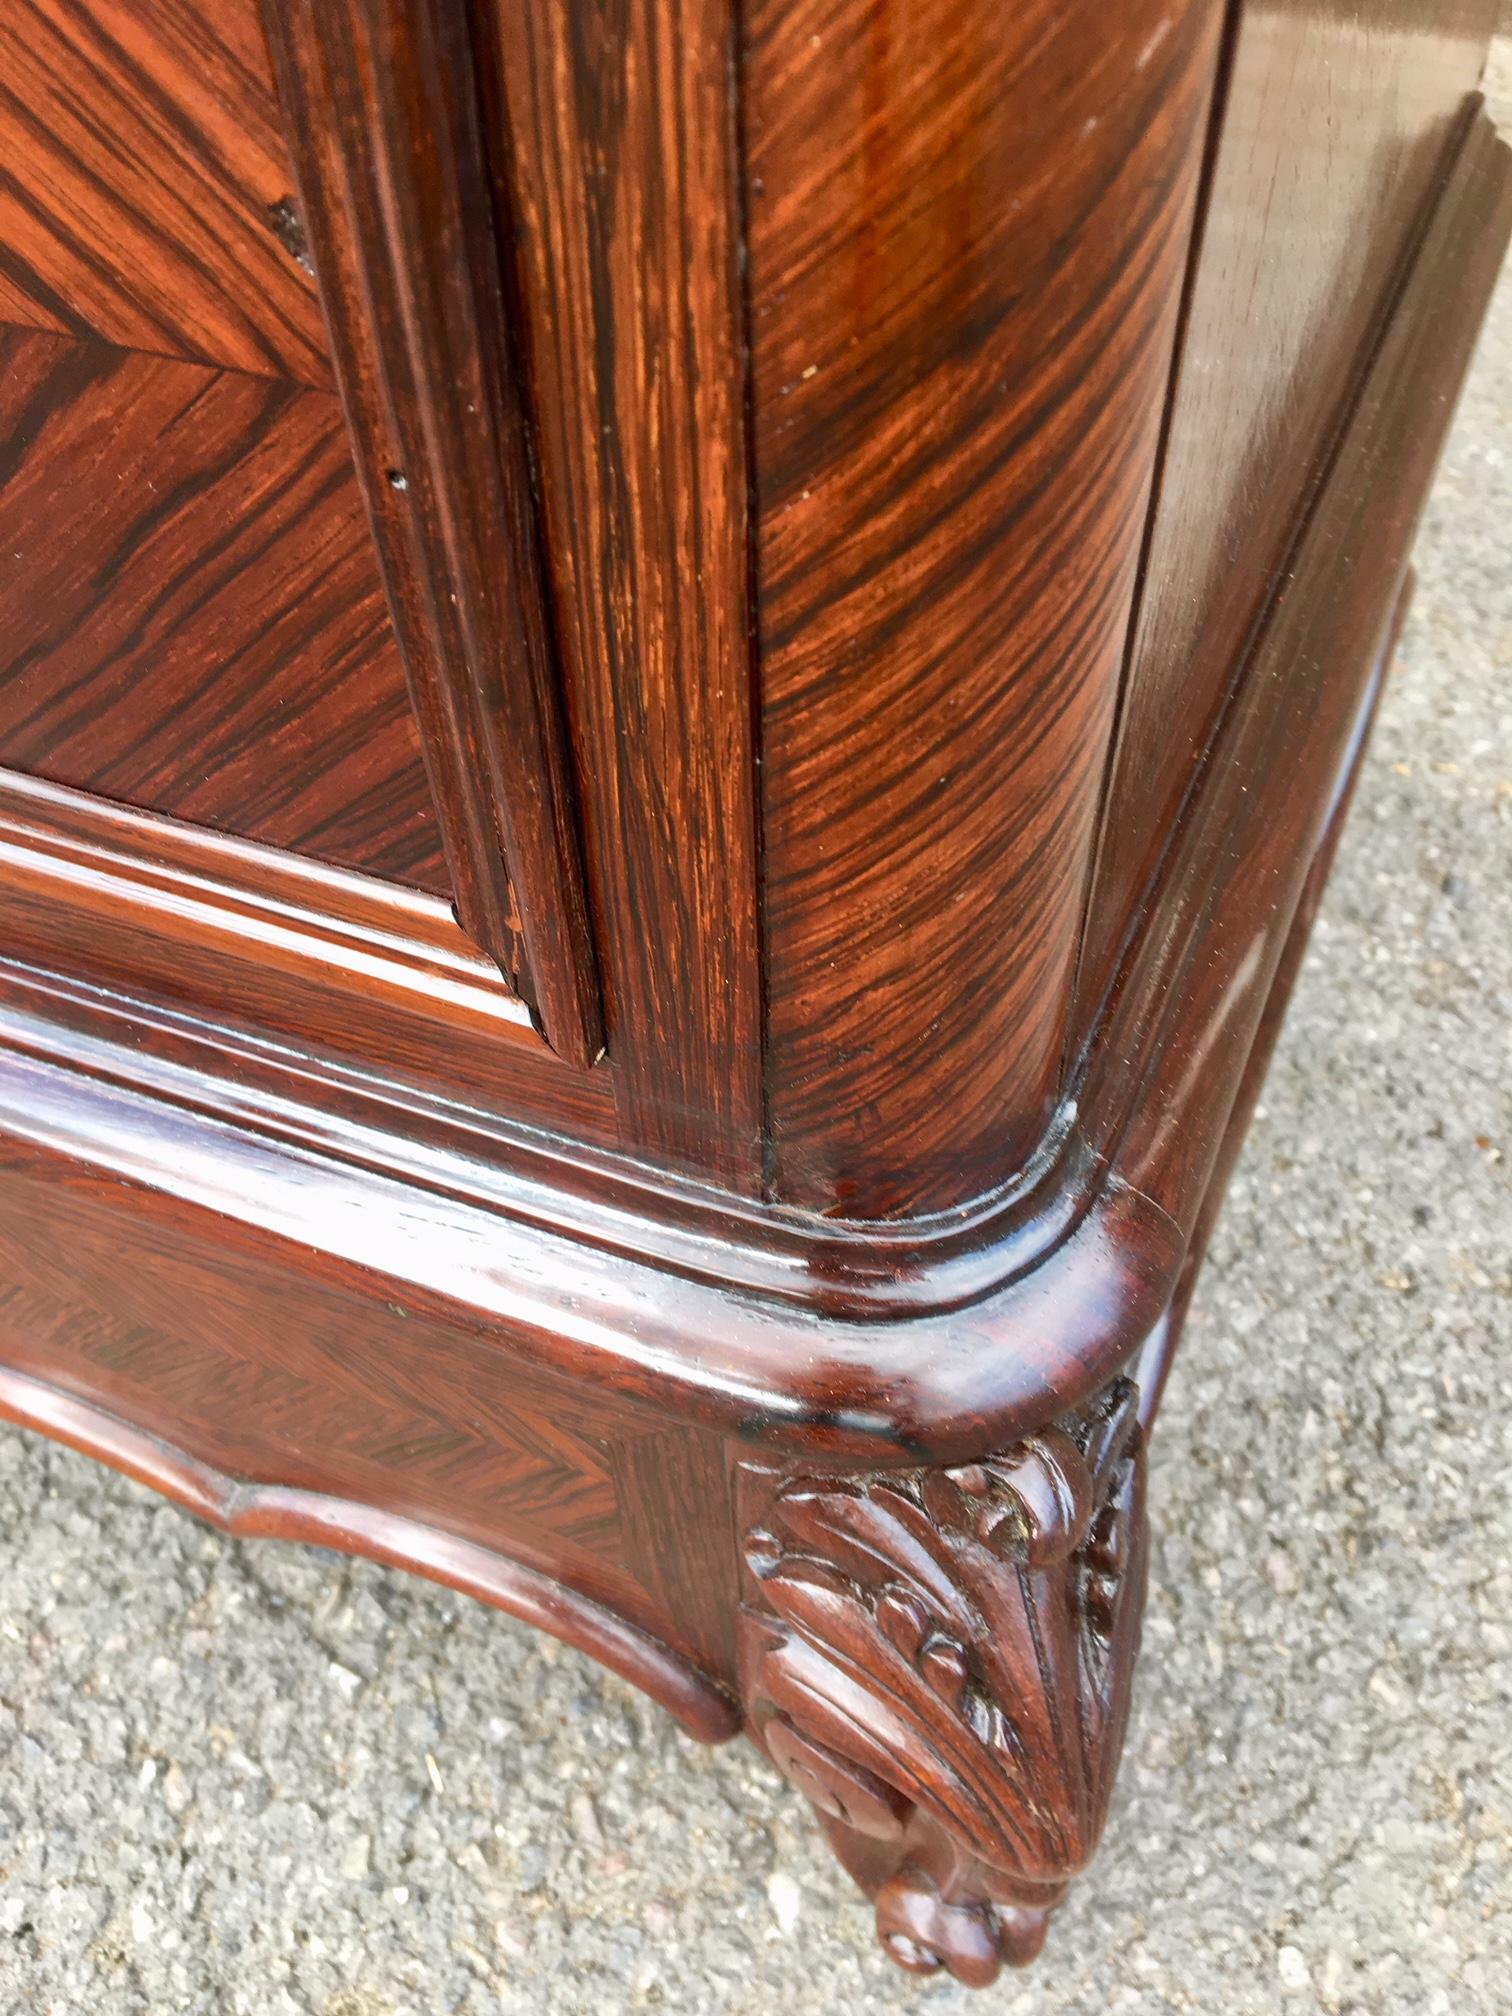 French Provincial Chest of Drawers in Rosewood, circa 1870